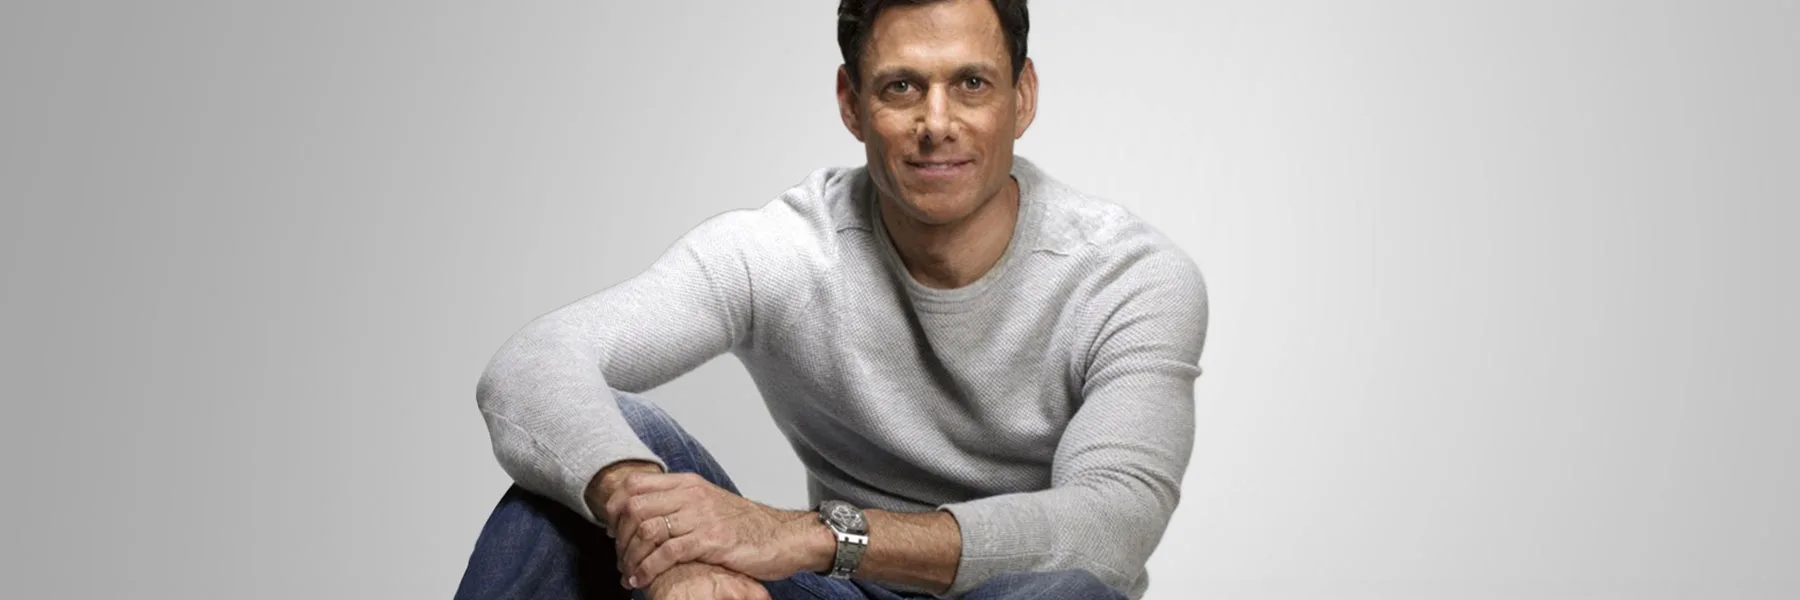 Podcast No. 4: Strauss Zelnick, Media Mogul and Author of &#8220;Becoming Ageless&#8221;